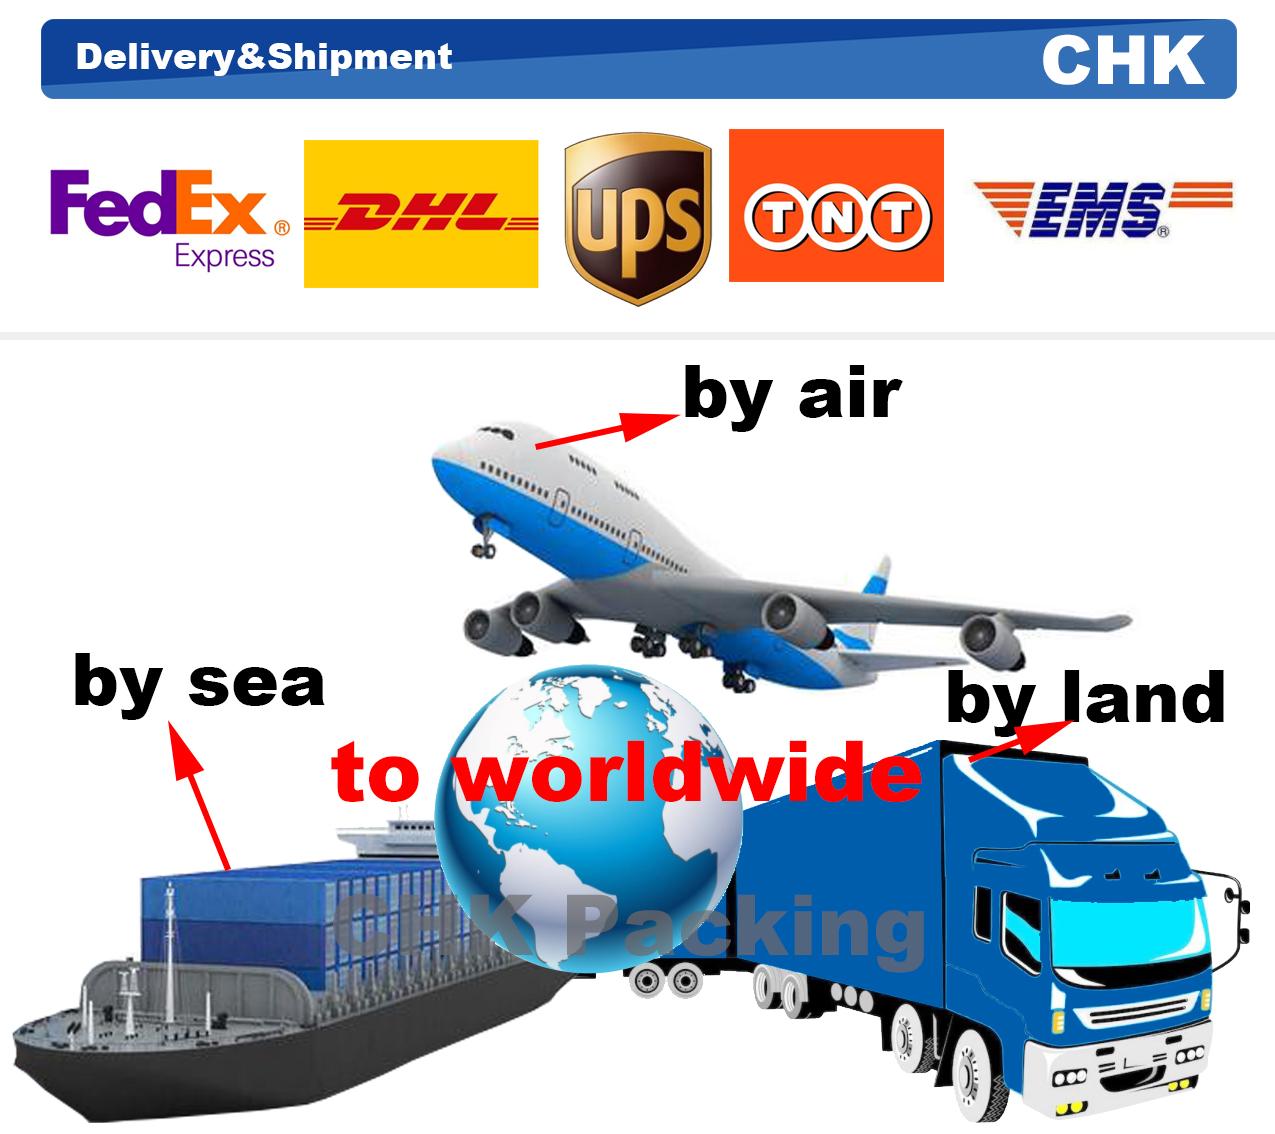 6.Delivery&Shipment